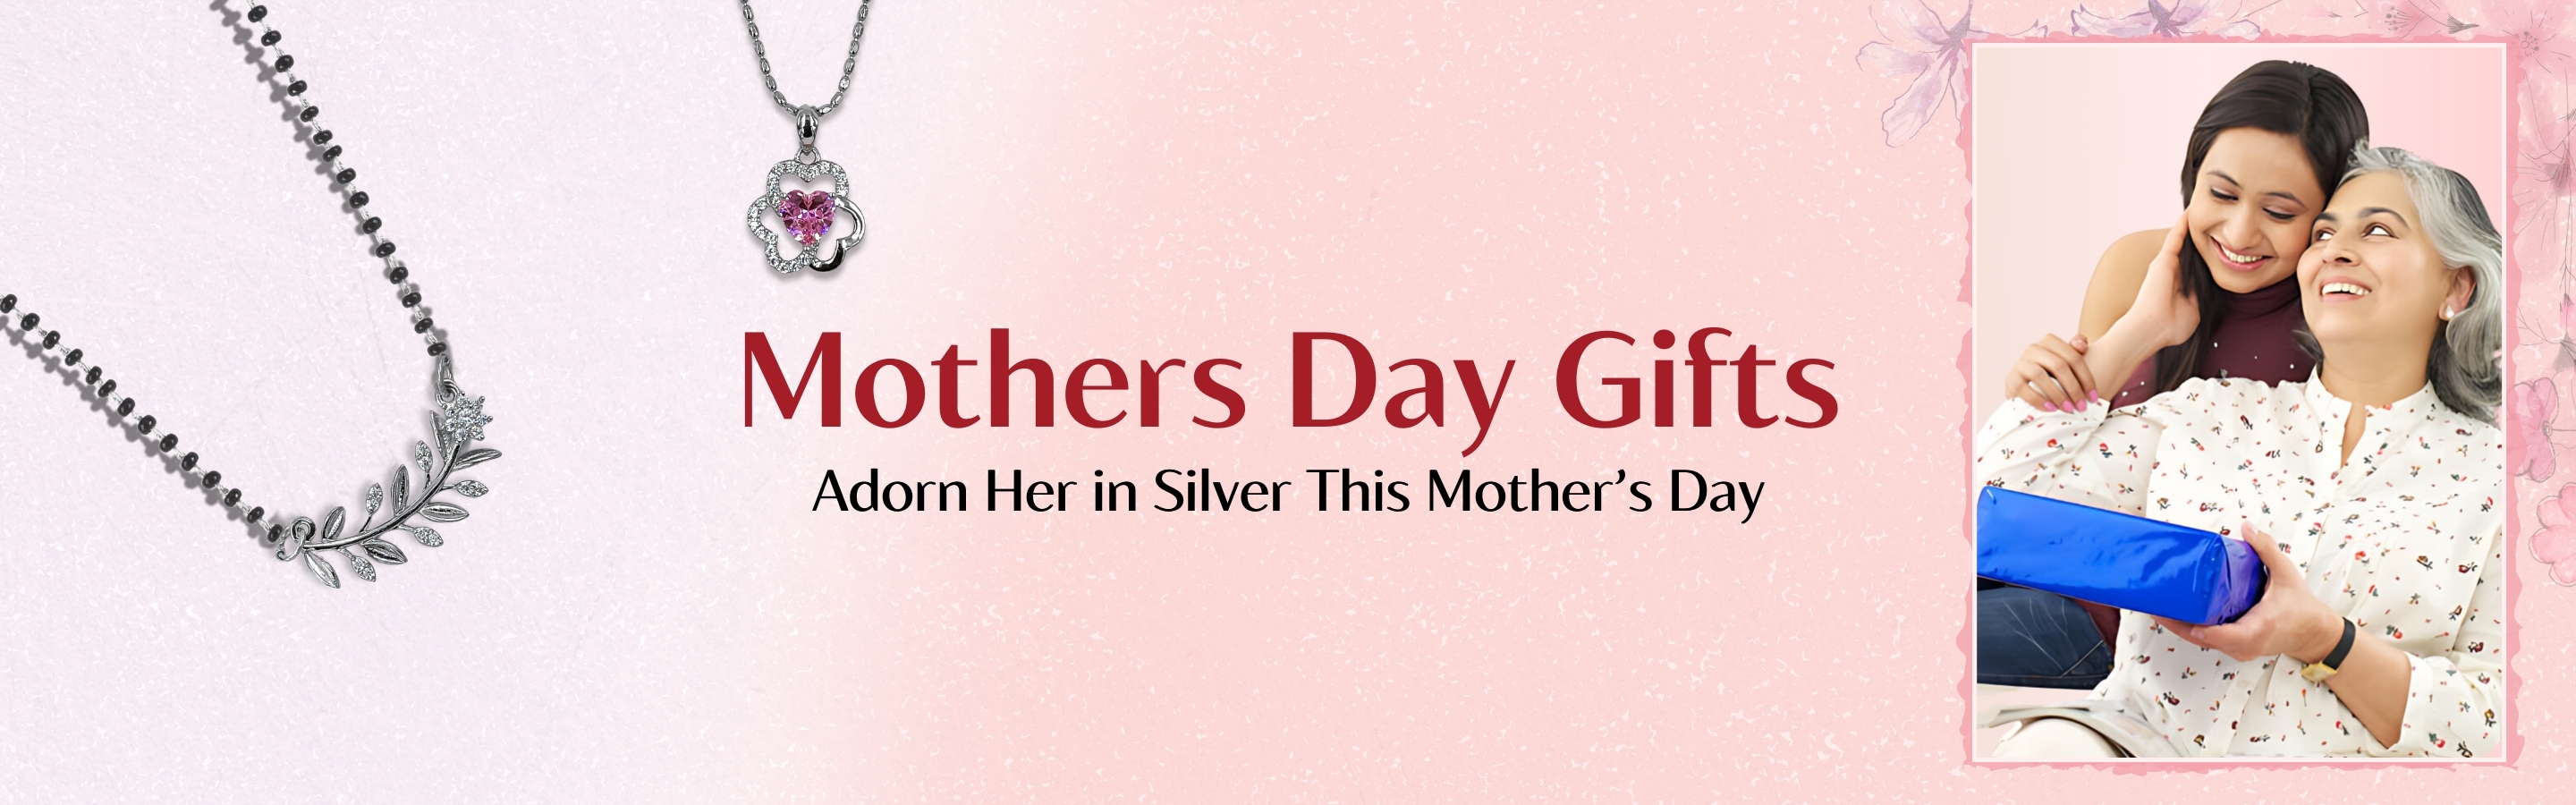 silver gift for mothers day.